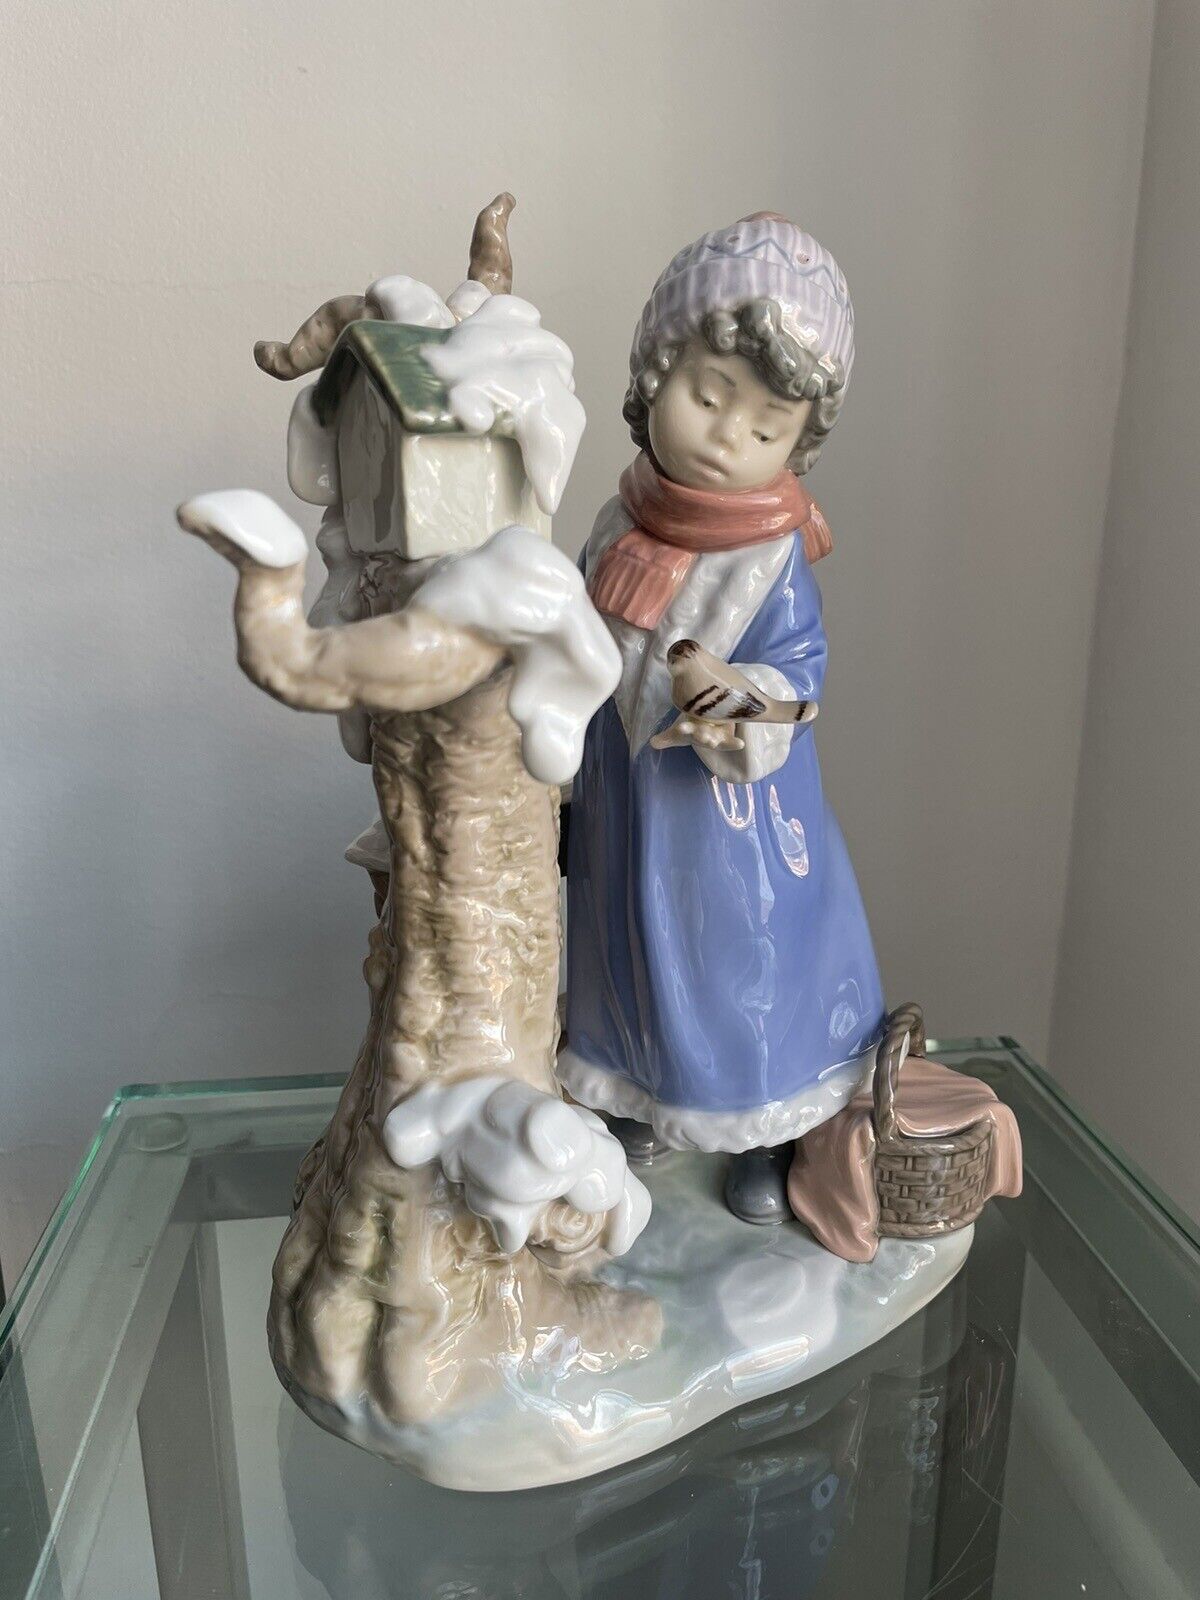 Lladro Collectible Figurine “Winter Frost”